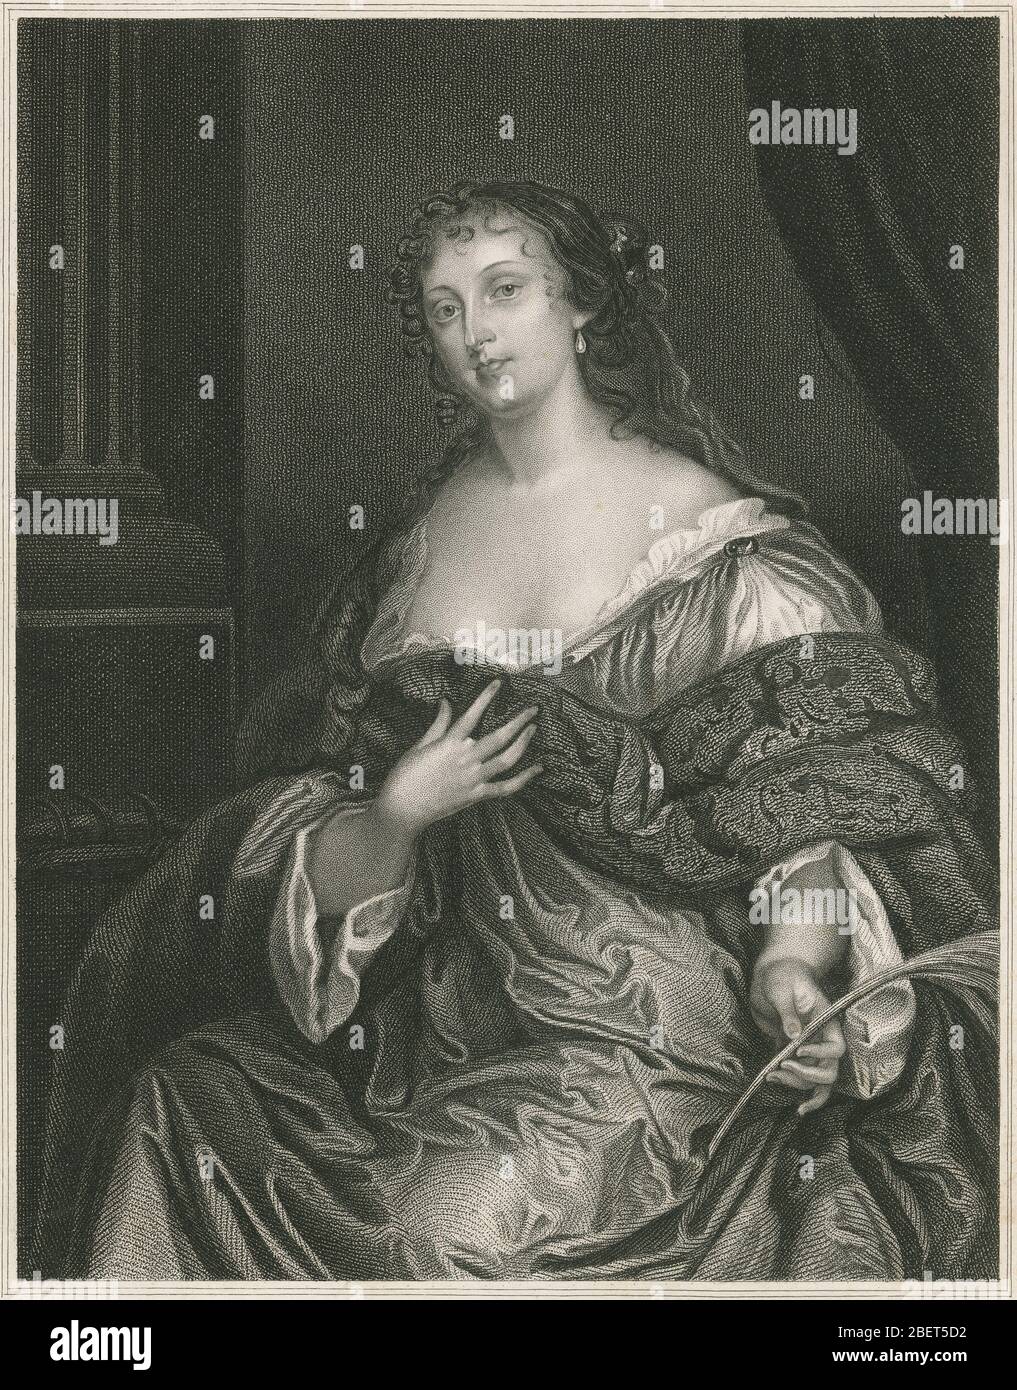 Antique engraving, Elizabeth, Countess de Gramont. Elizabeth, comtesse de Gramont (1641-1708), was an Irish-born beauty and courtier. She was known as 'la belle Hamilton' and was one of the Windsor Beauties. SOURCE: ORIGINAL ENGRAVING Stock Photo